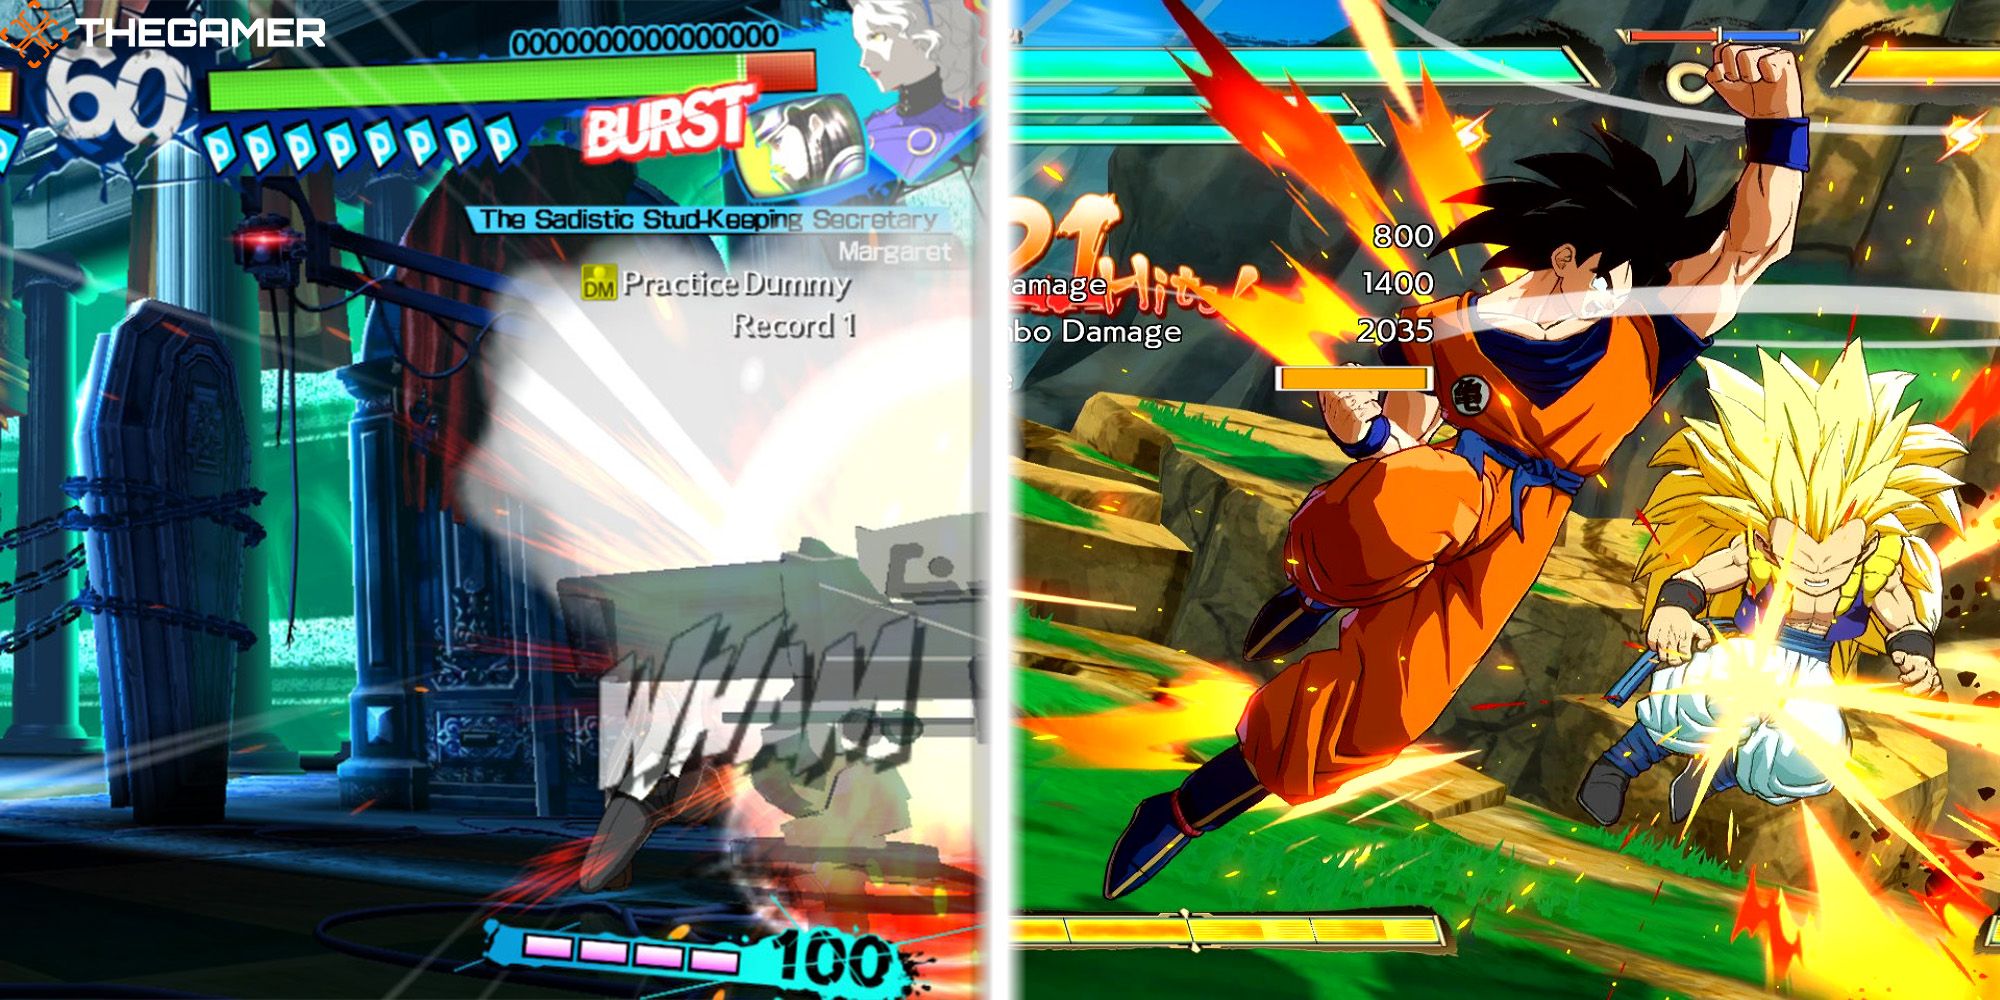 [Left Panel] Yu assaults Margaret with an All-Out Rush attack. Persona 4 Arena Ultimax. [Right Panel] Goku launches Goken with a Dragon Rush attack. Dragonball FighterZ.